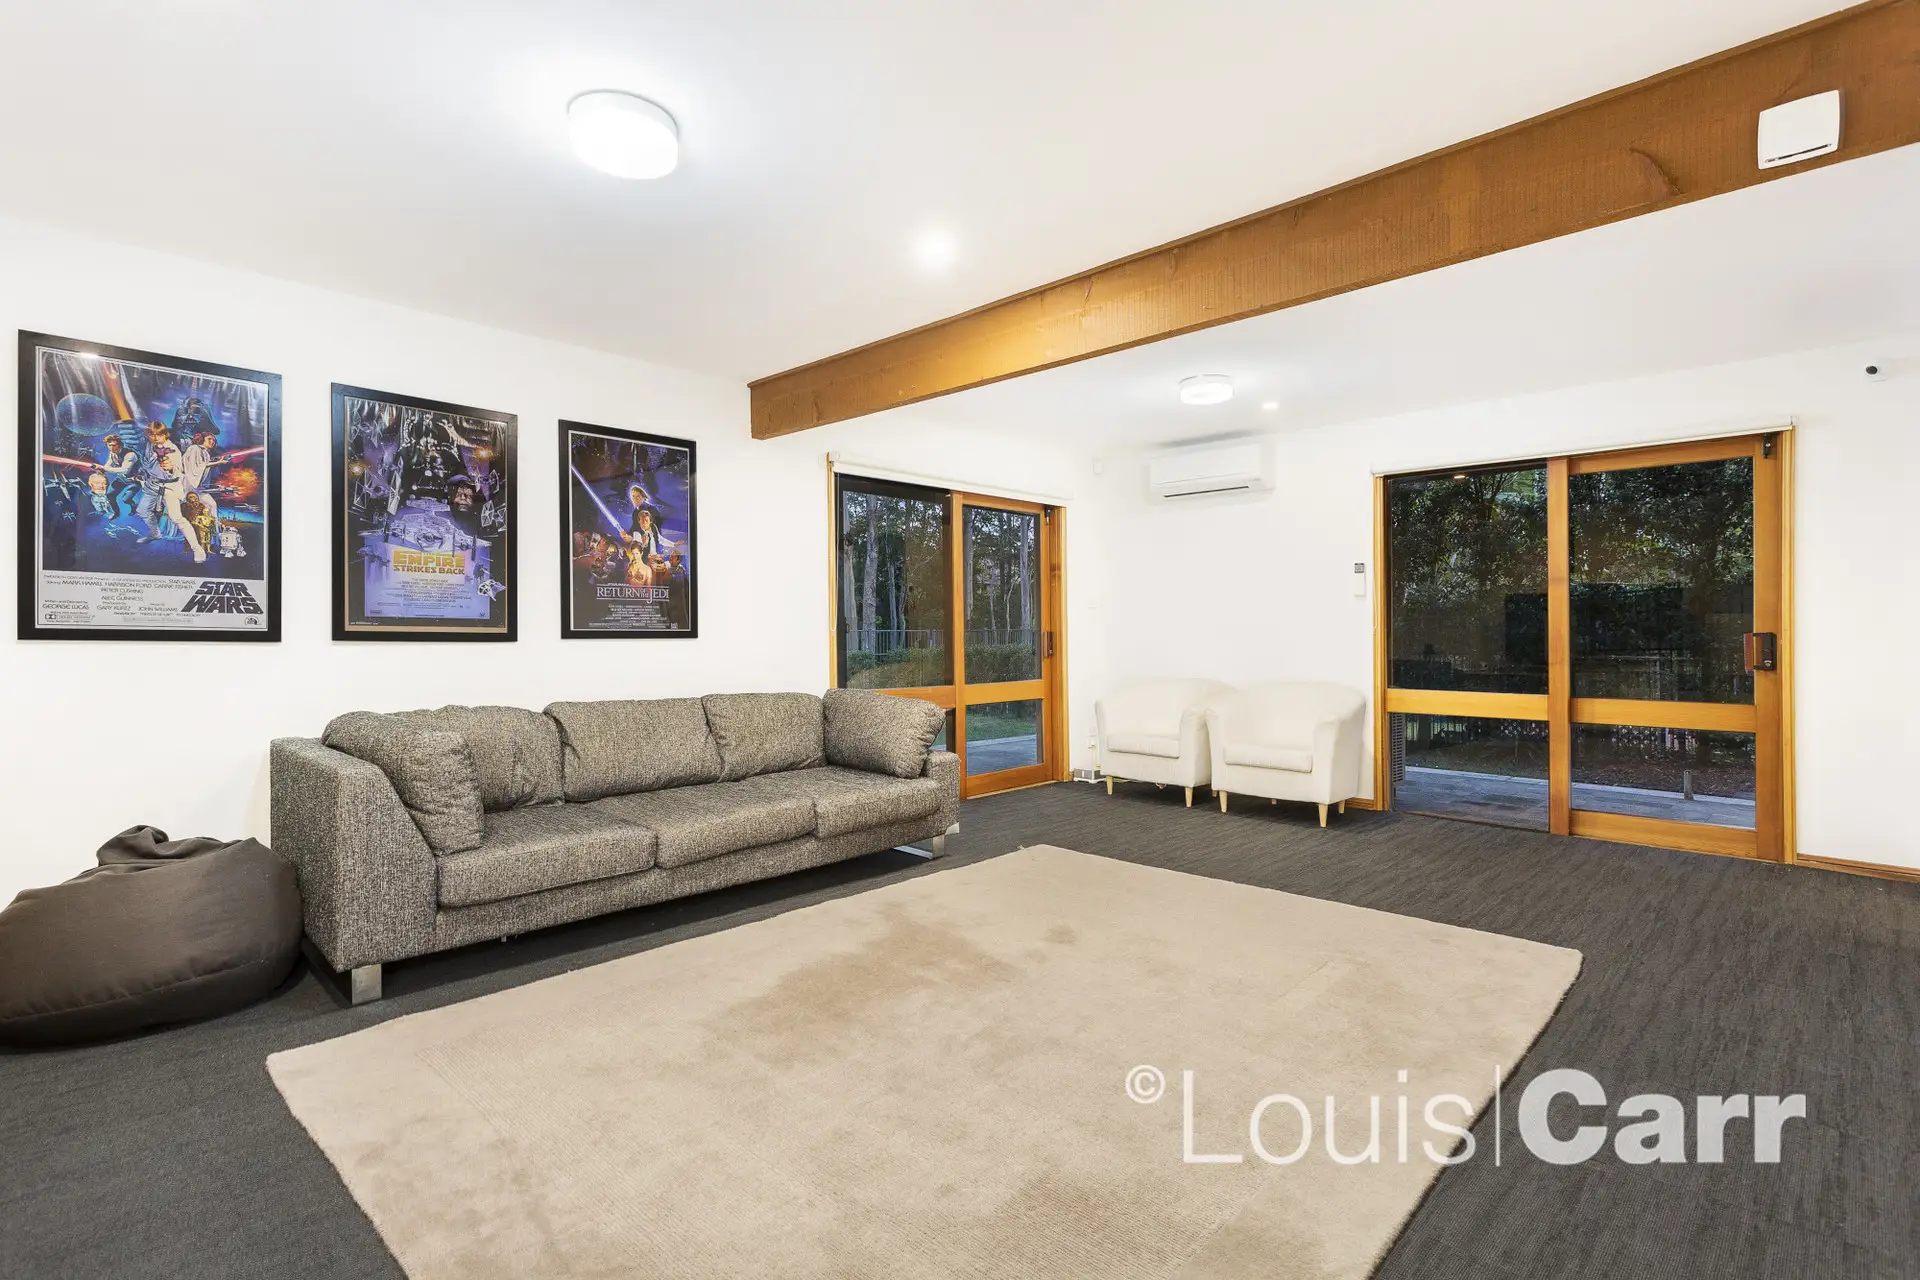 Photo #6: 98 Oratava Avenue, West Pennant Hills - Sold by Louis Carr Real Estate